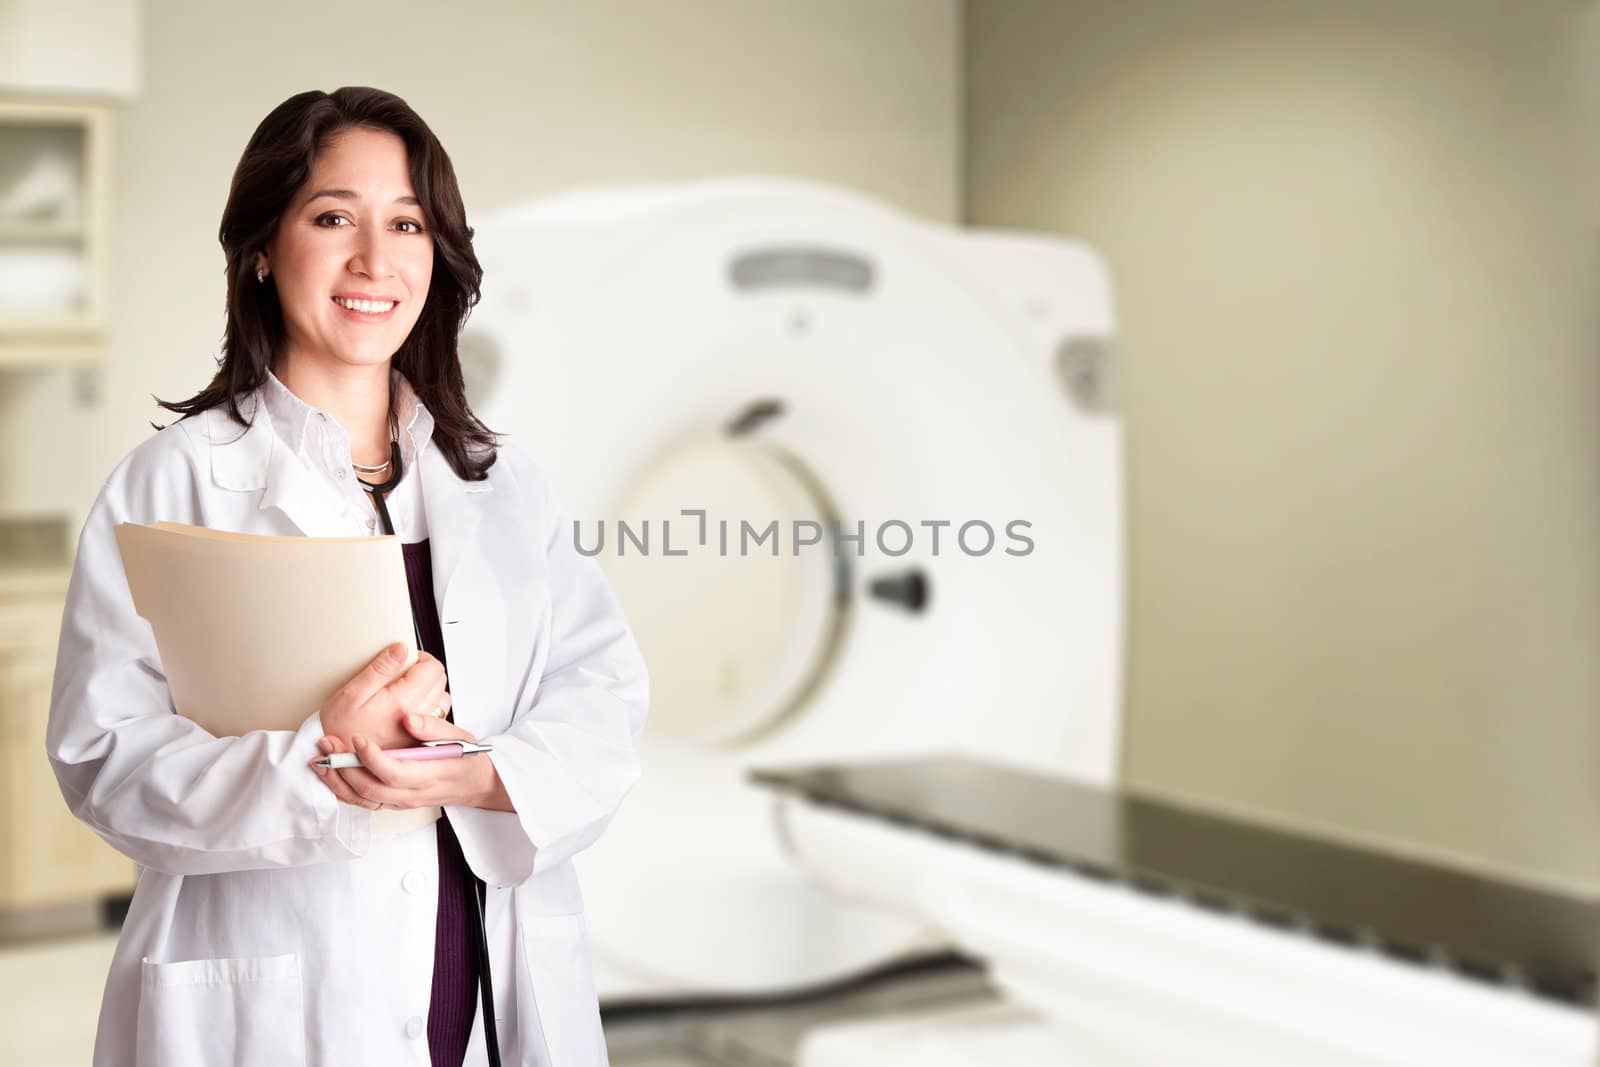 Beautiful happy female doctor physician radiologist holding patient medical chart and pen standing in CT CAT Scan room at hospital, isolated.